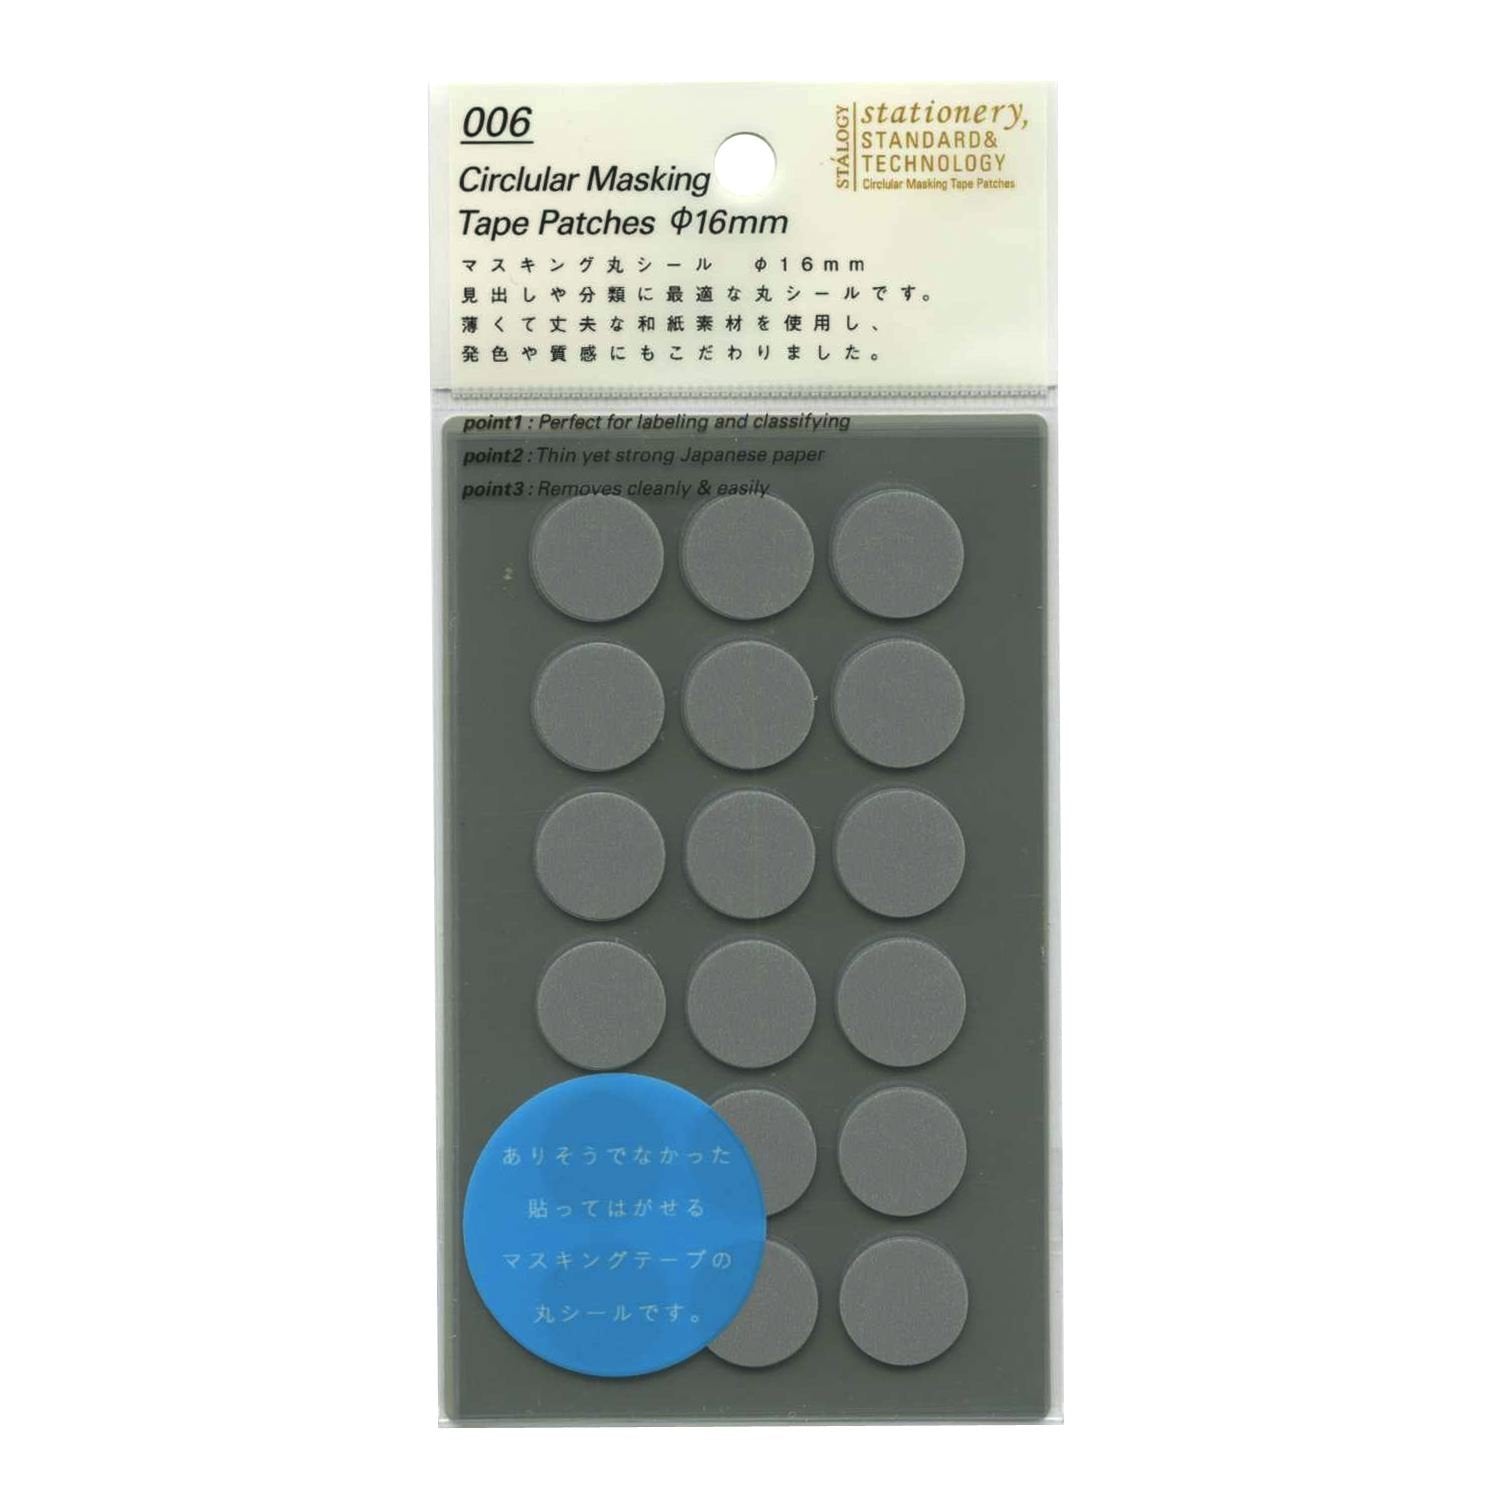 Grey Circular Masking Tape Patches. The circular masking patches are made from thin, yet strong Japanese paper, perfect for labelling and classifying. Durable Writeable.